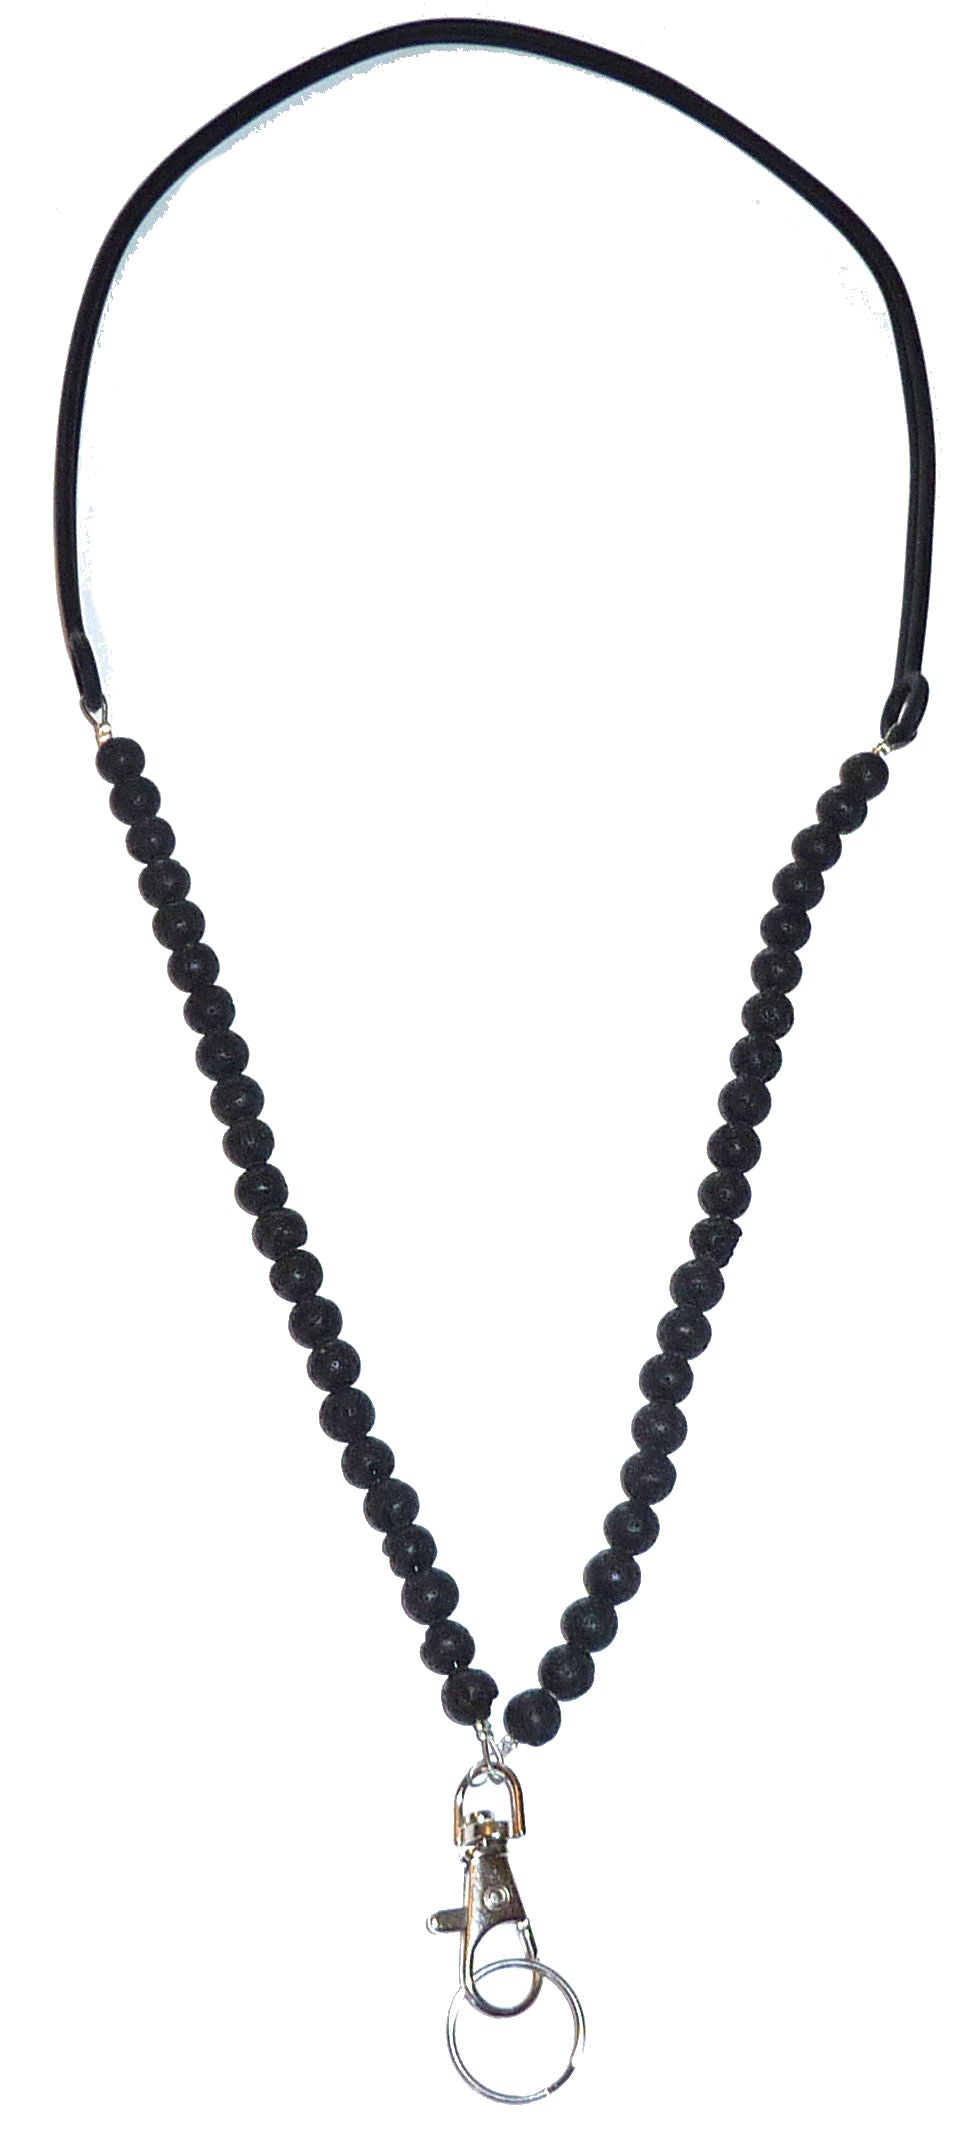 Black Lava Beaded Cell Phone Lanyard - Silicone Strap